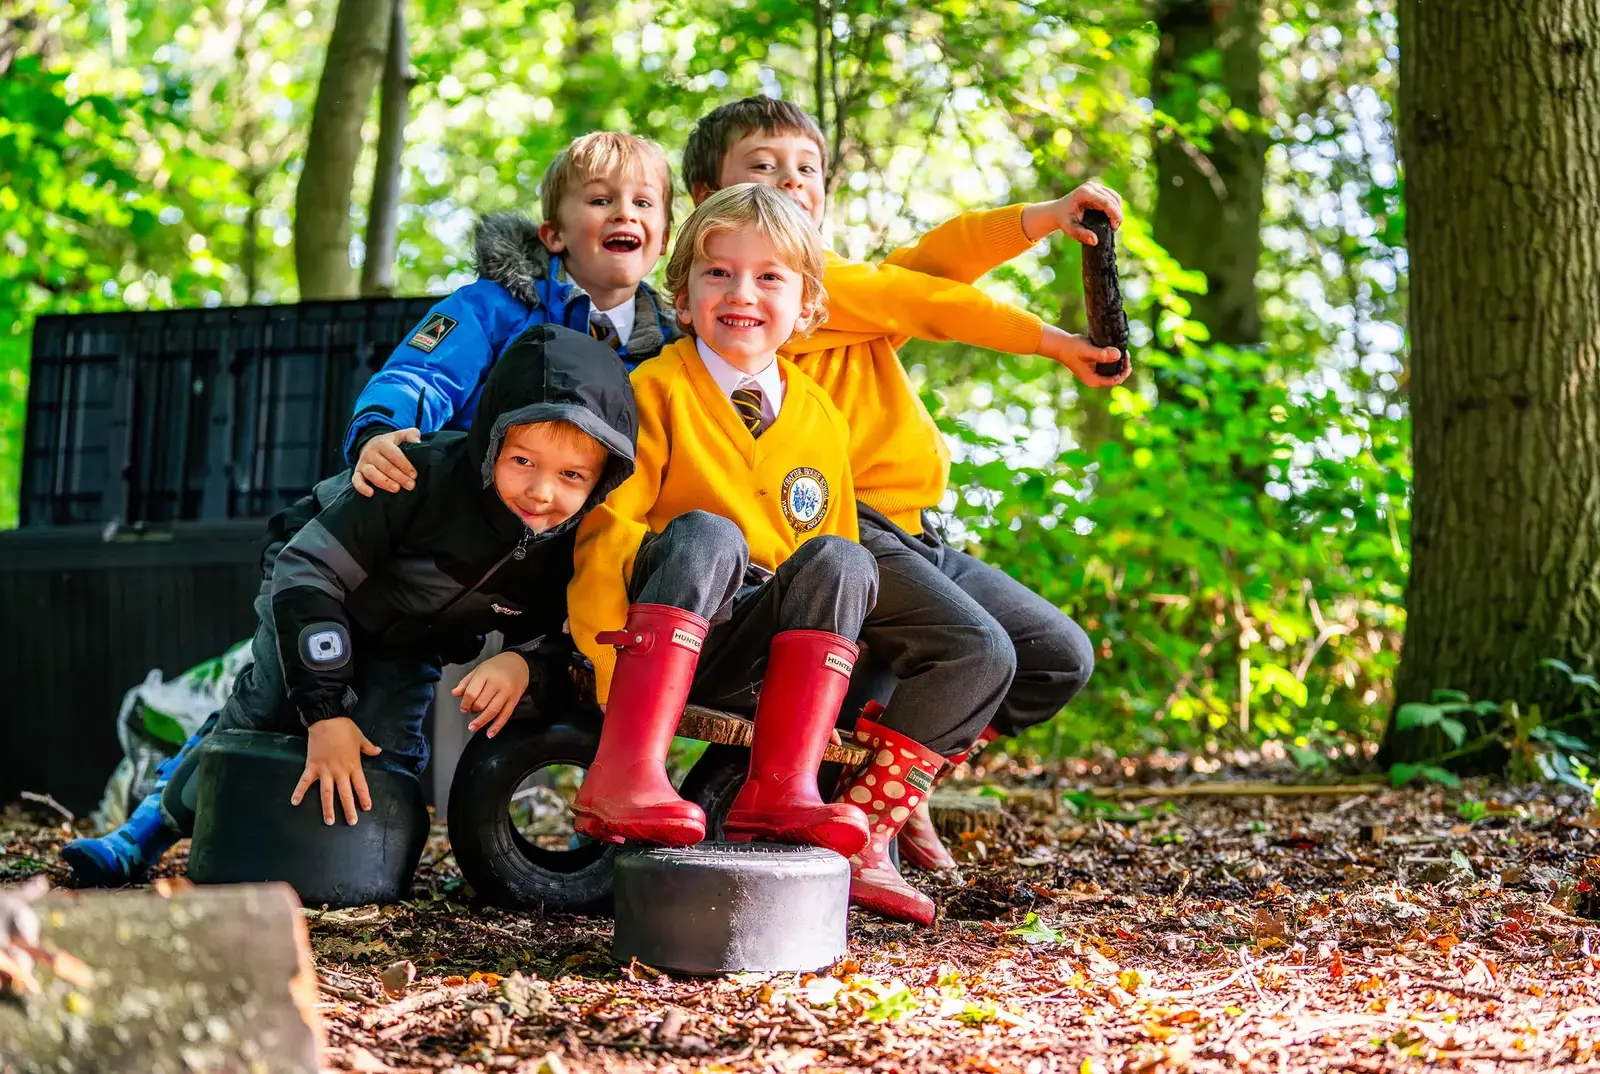 Chapter House pupils at Queen Ethelburga's in Forest School